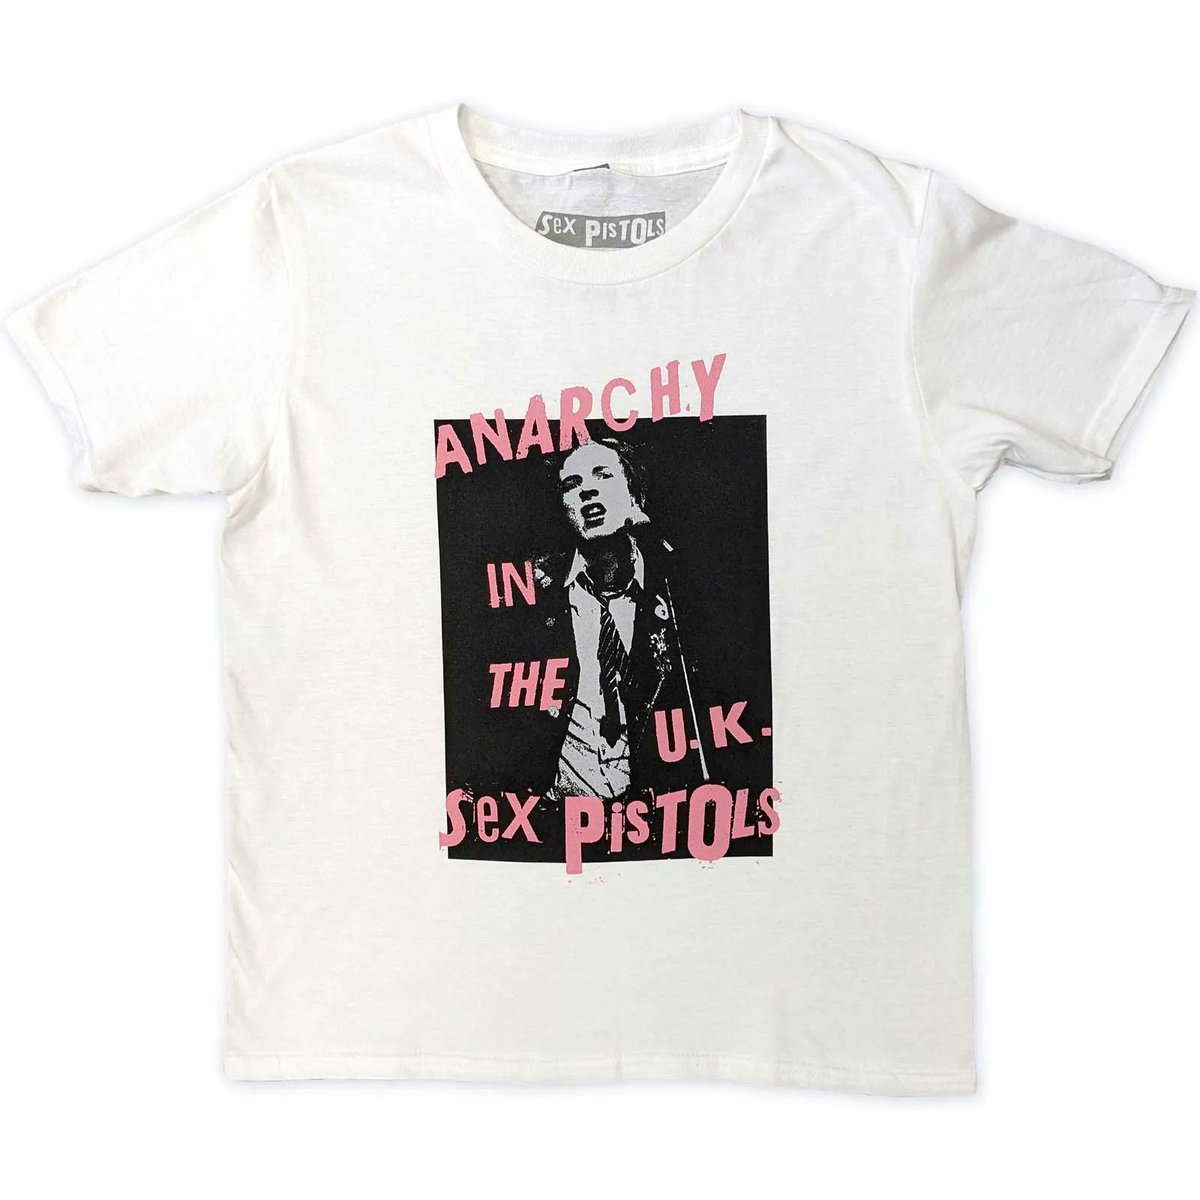 An official licensed The Sex Pistols Kids T-Shirt featuring the 'Anarchy In The UK' design motif, available in white colourway.

#rockoff #sexpistols #official #merchandise #tshirt #licensed #bandmerch #kids